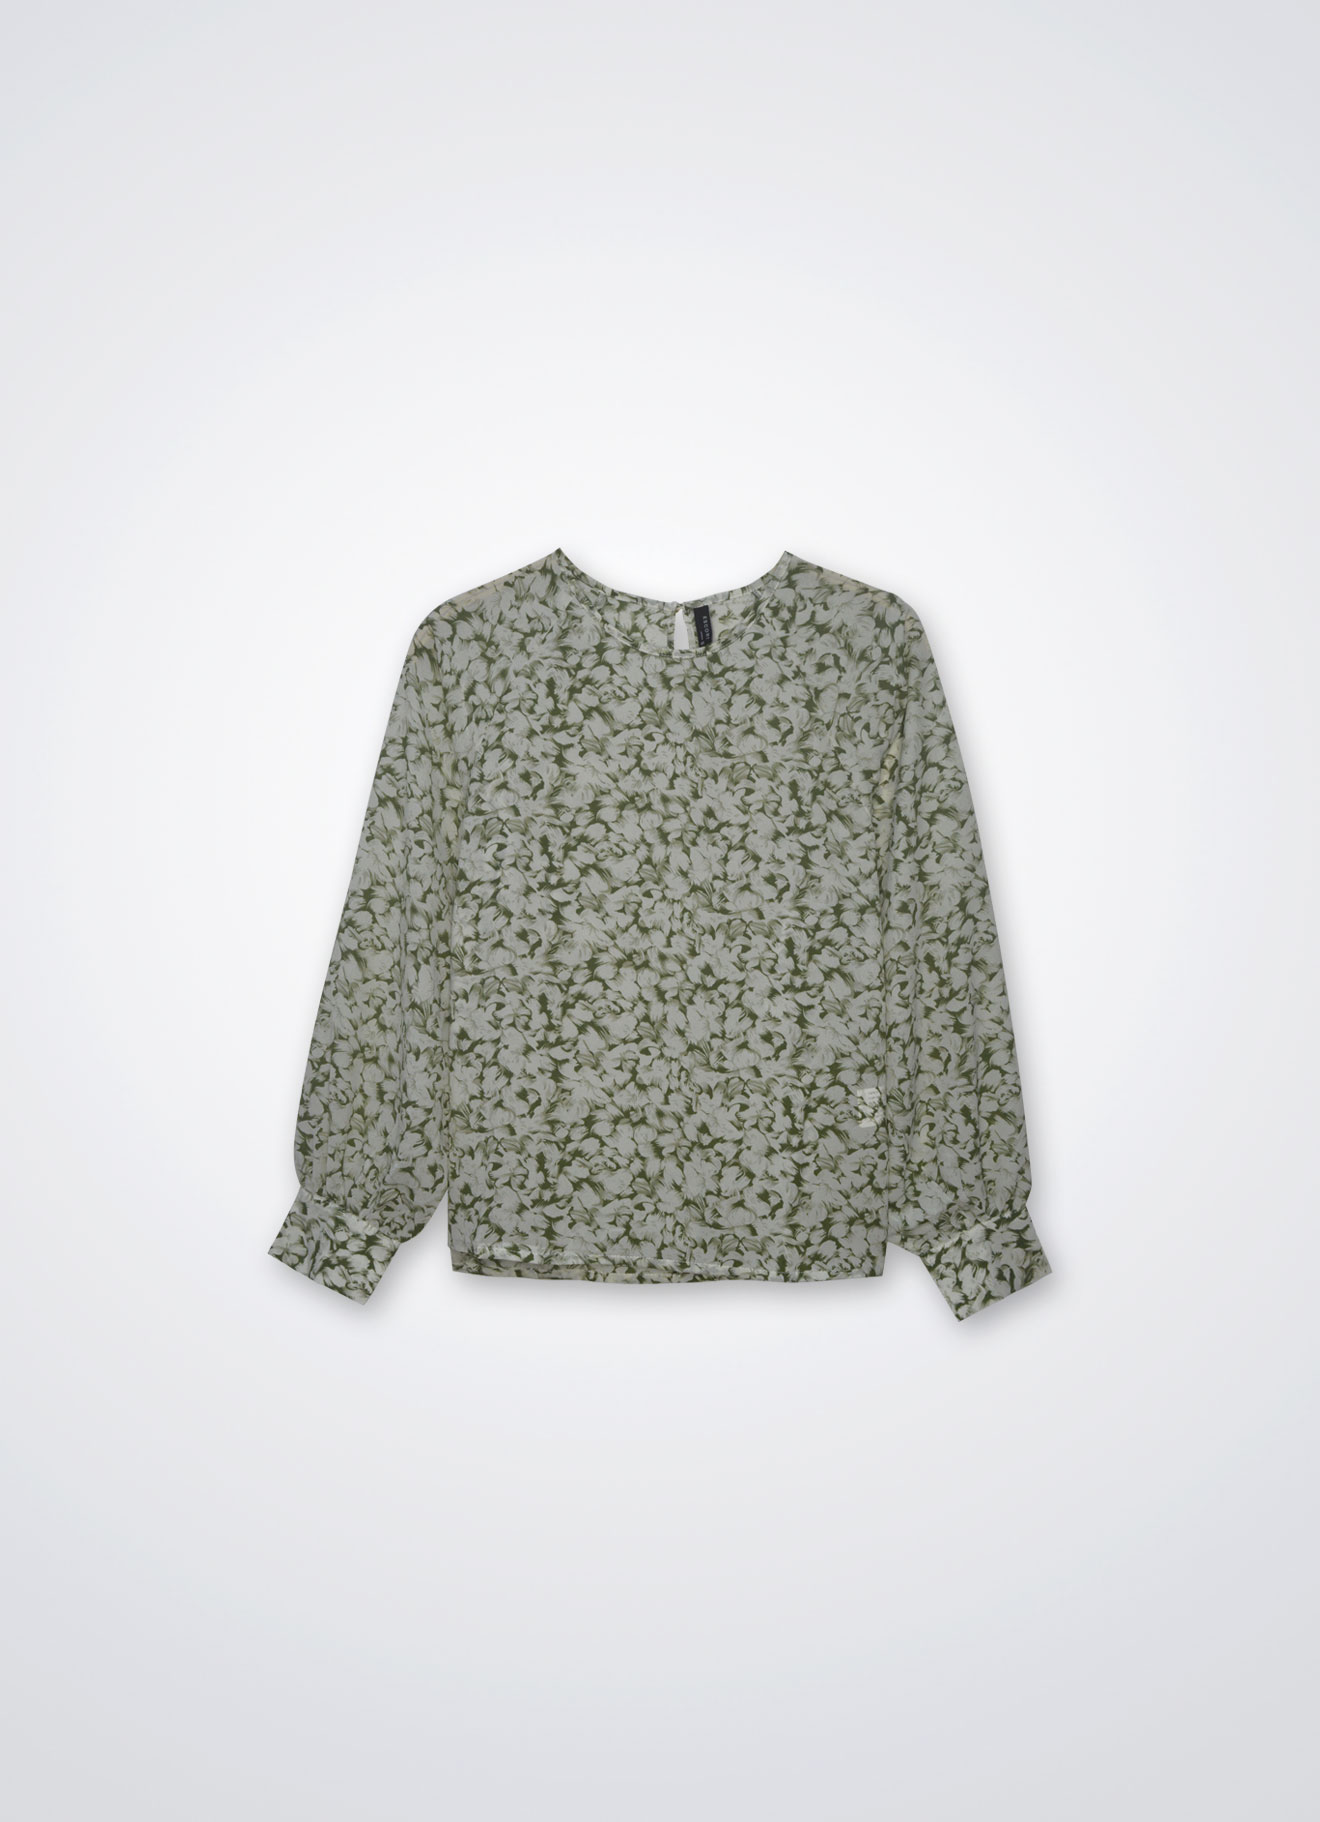 Olive-Branch by Long Sleeve Blouse